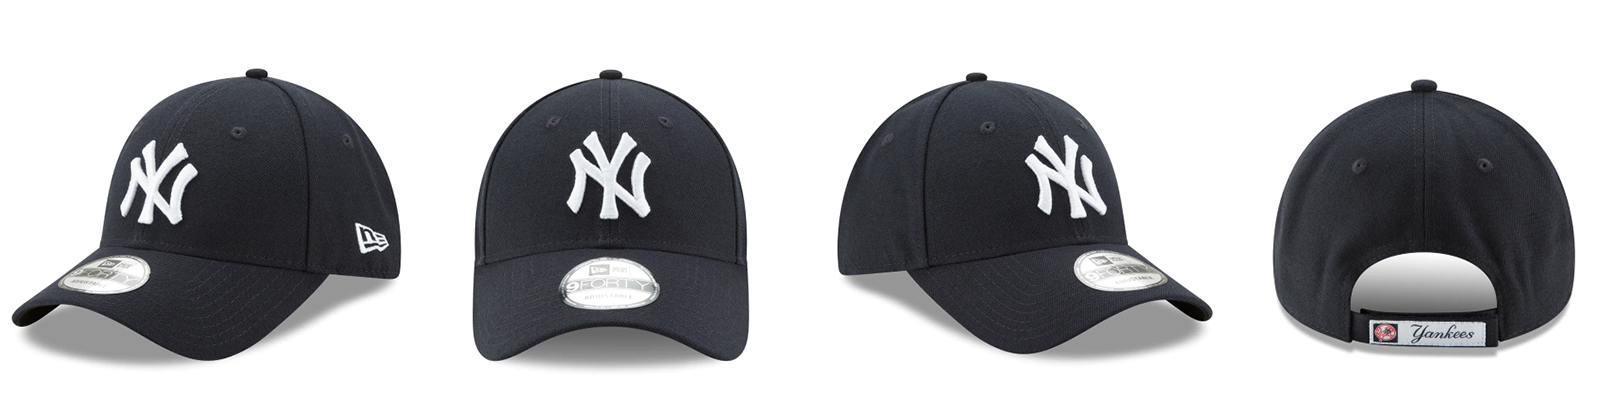 Spotlight on: the 9FORTY cap from New Era